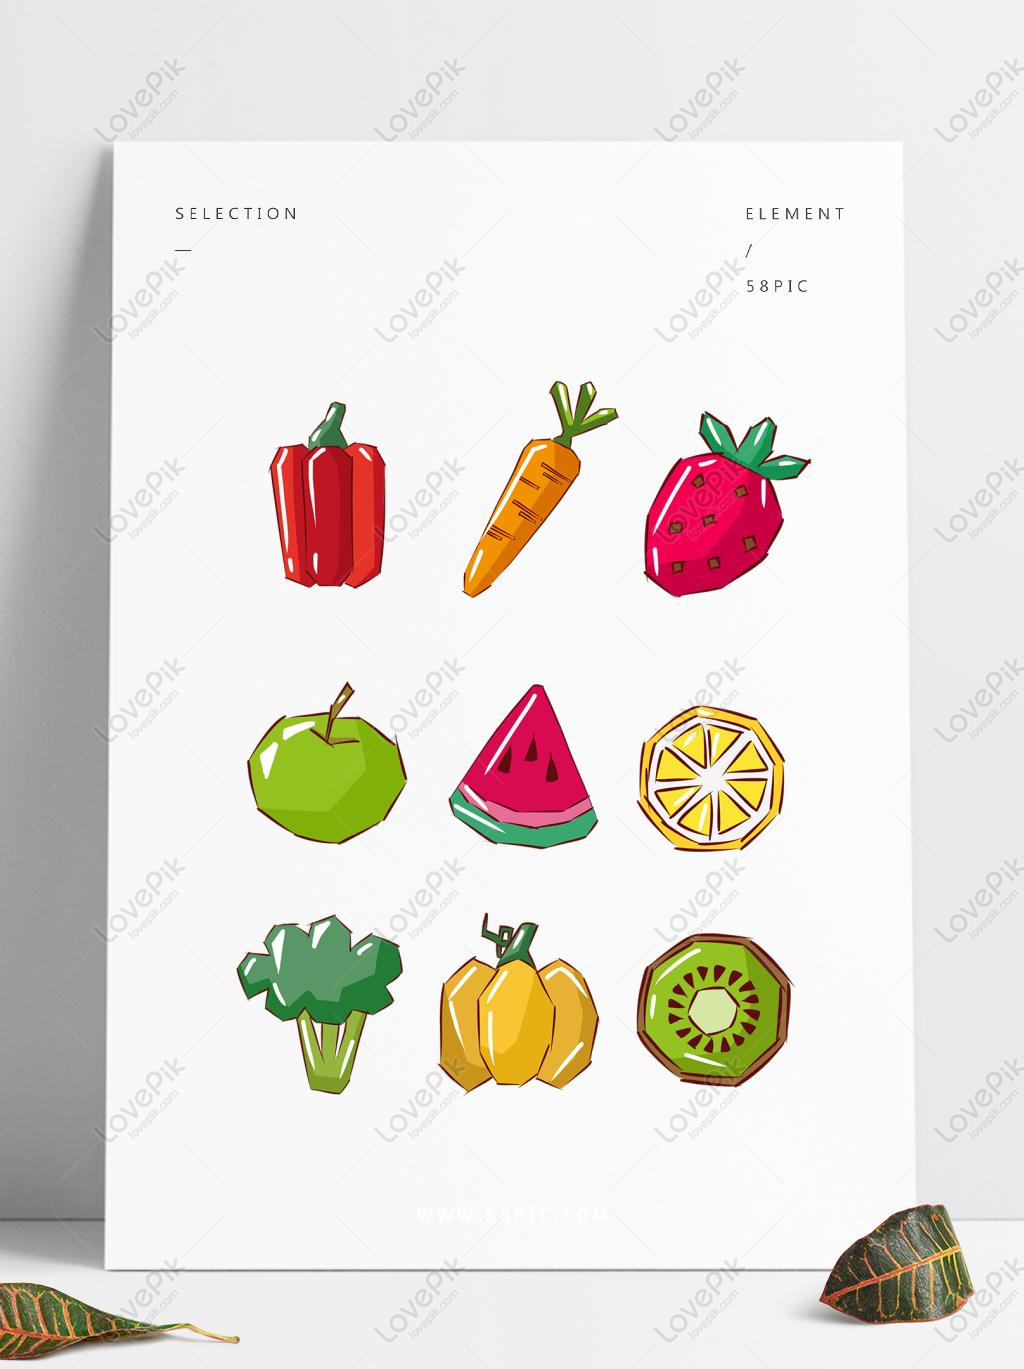 How to Draw Fruits and Vegetables, KS ART | Vegetable drawing, Fruits  drawing, Fruit coloring pages